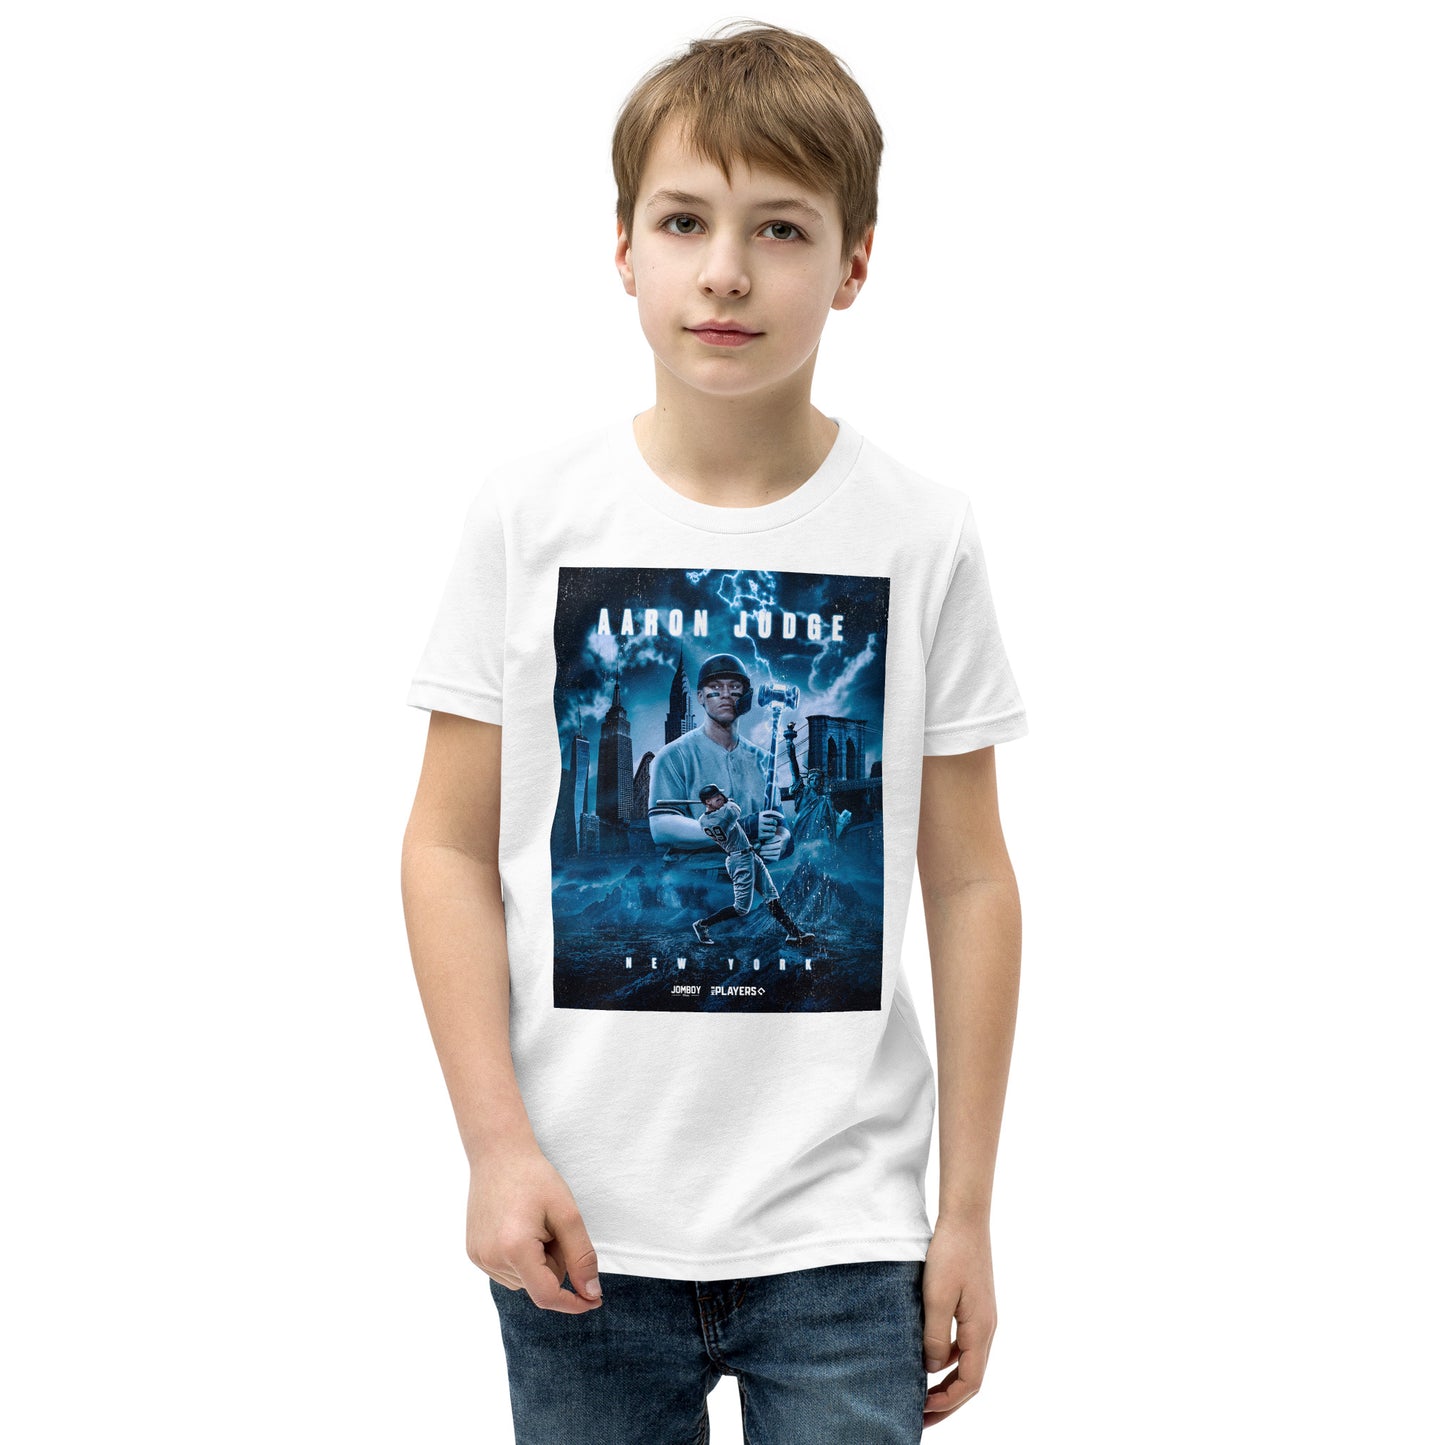 Aaron Judge, King of NYC | Youth T-Shirt